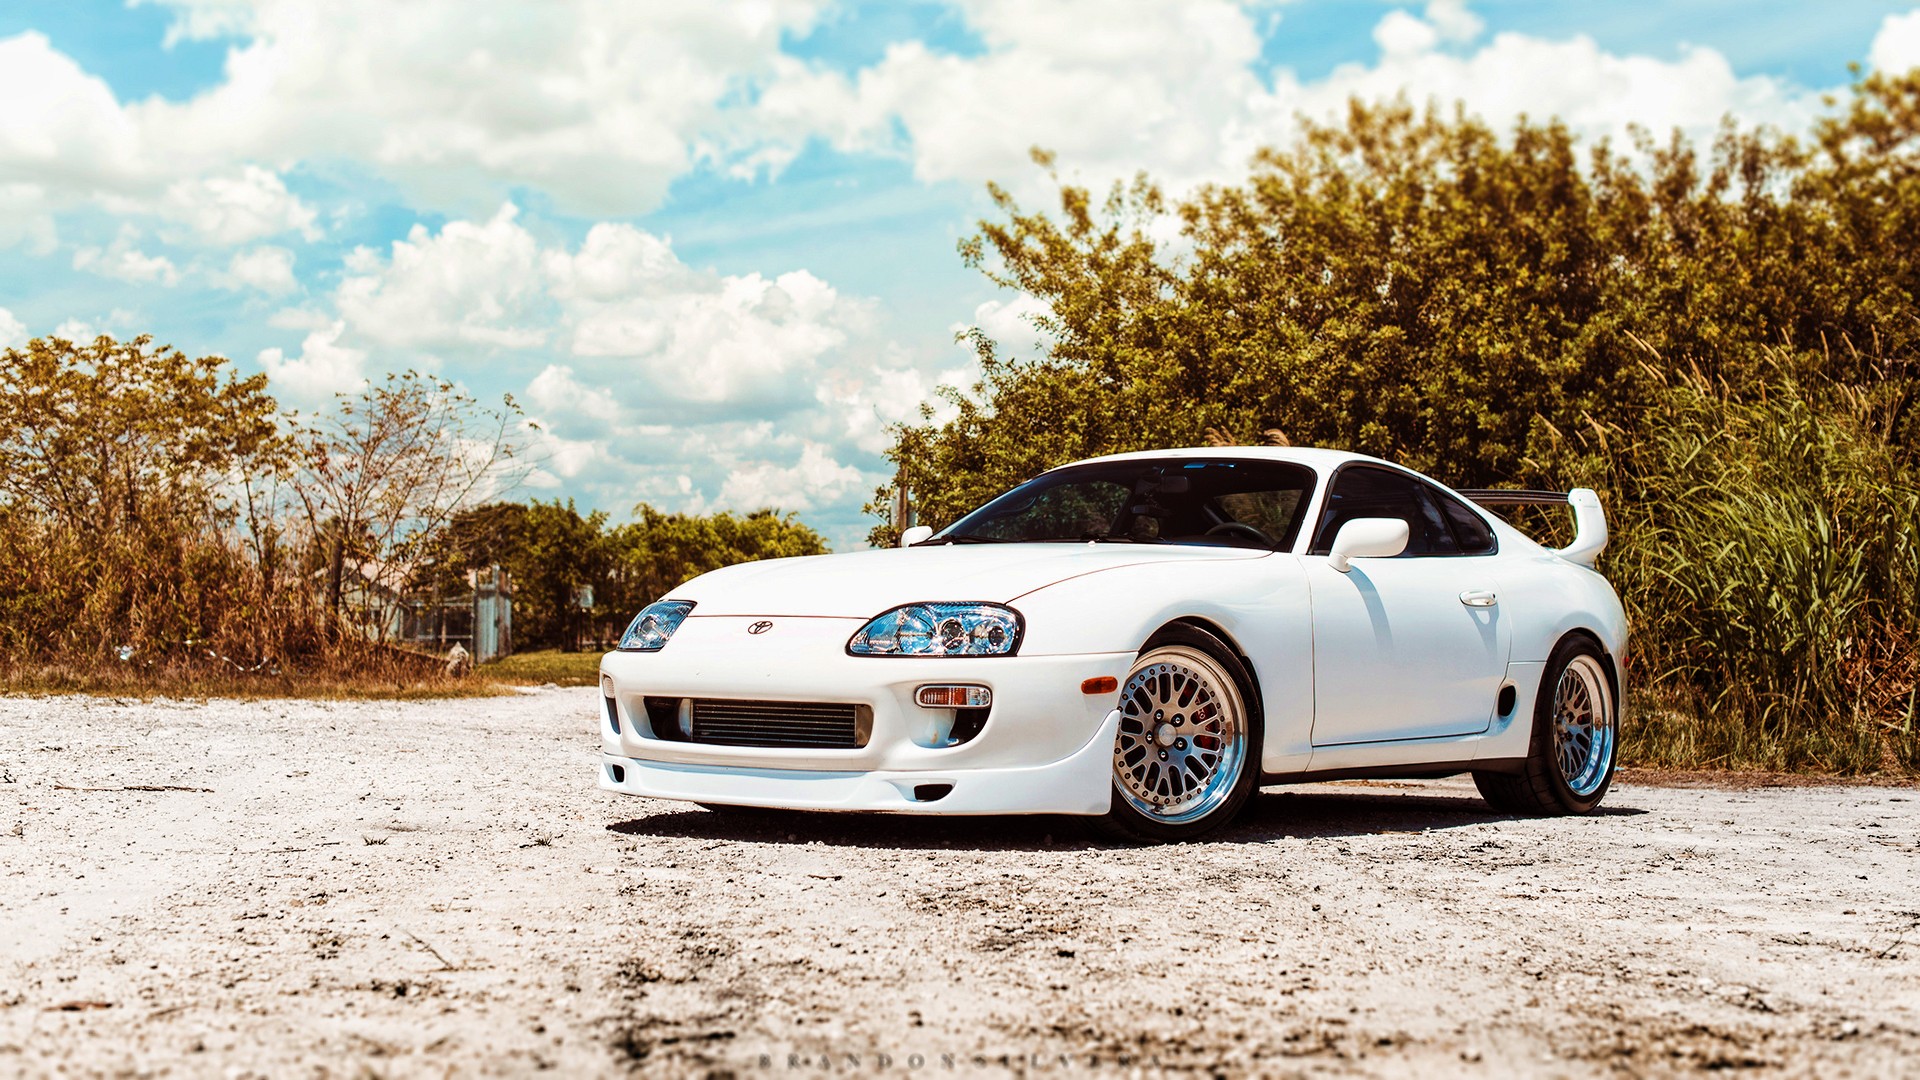 Free download Toyota Supra Wallpapers HD Desktop and Mobile Backgrounds [1920x1080] for your